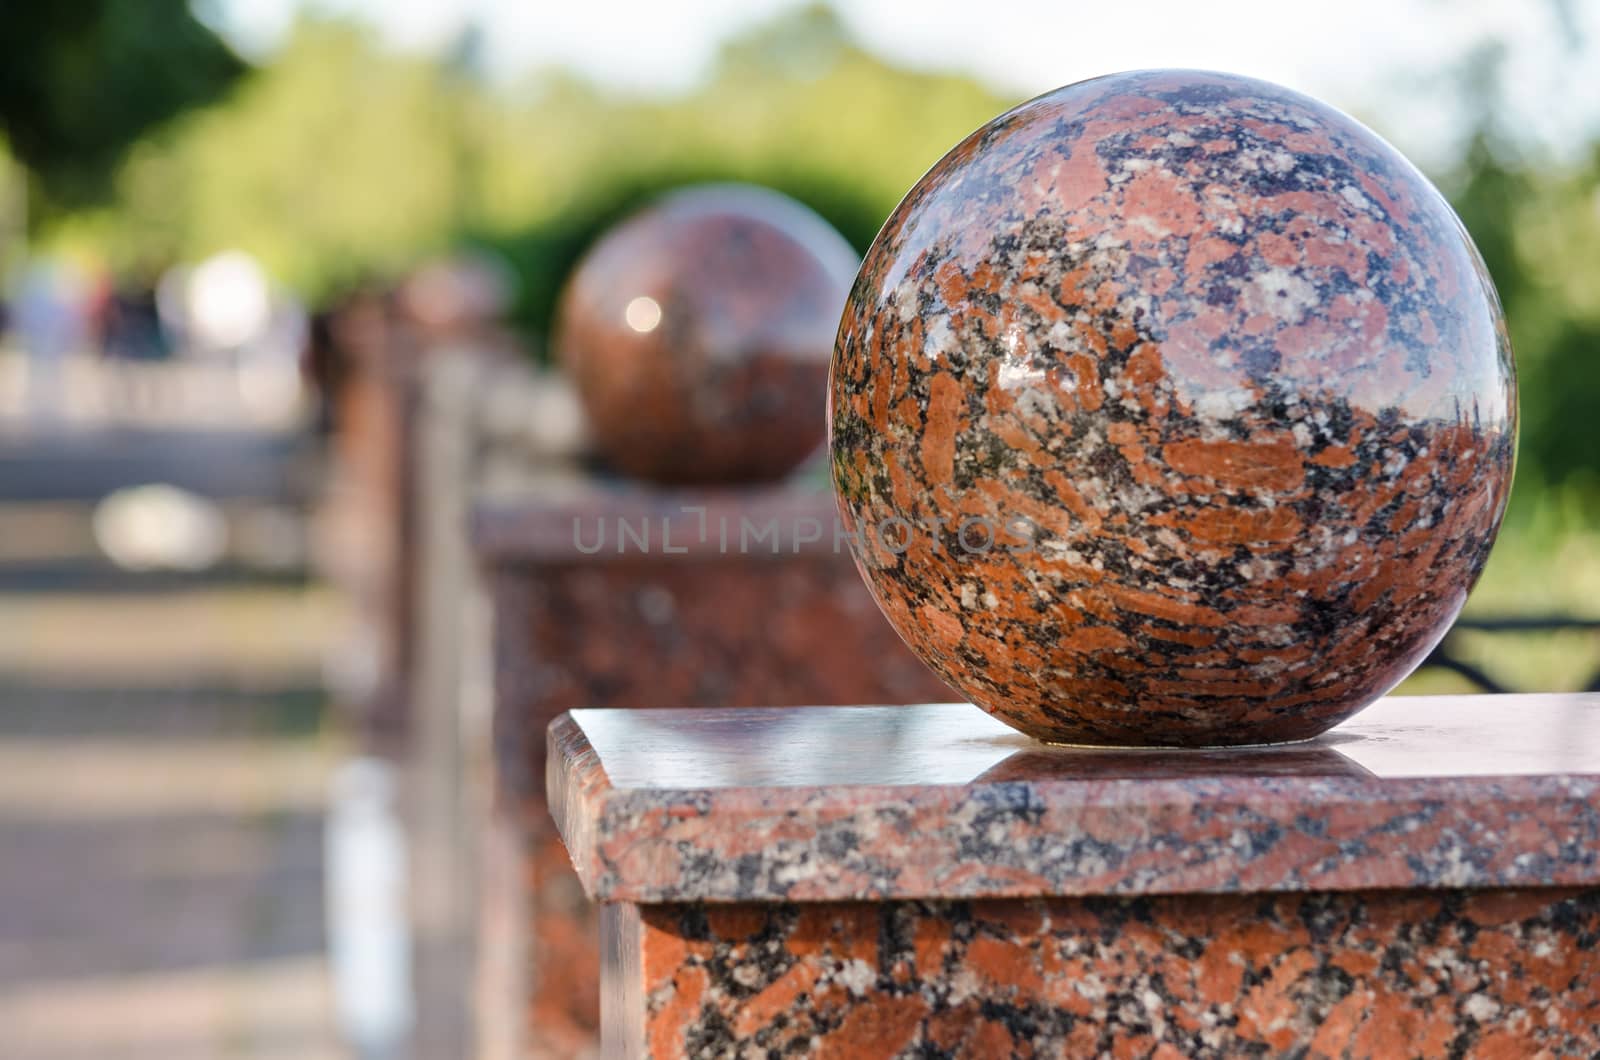 Granite balls at the city fence by Gaina